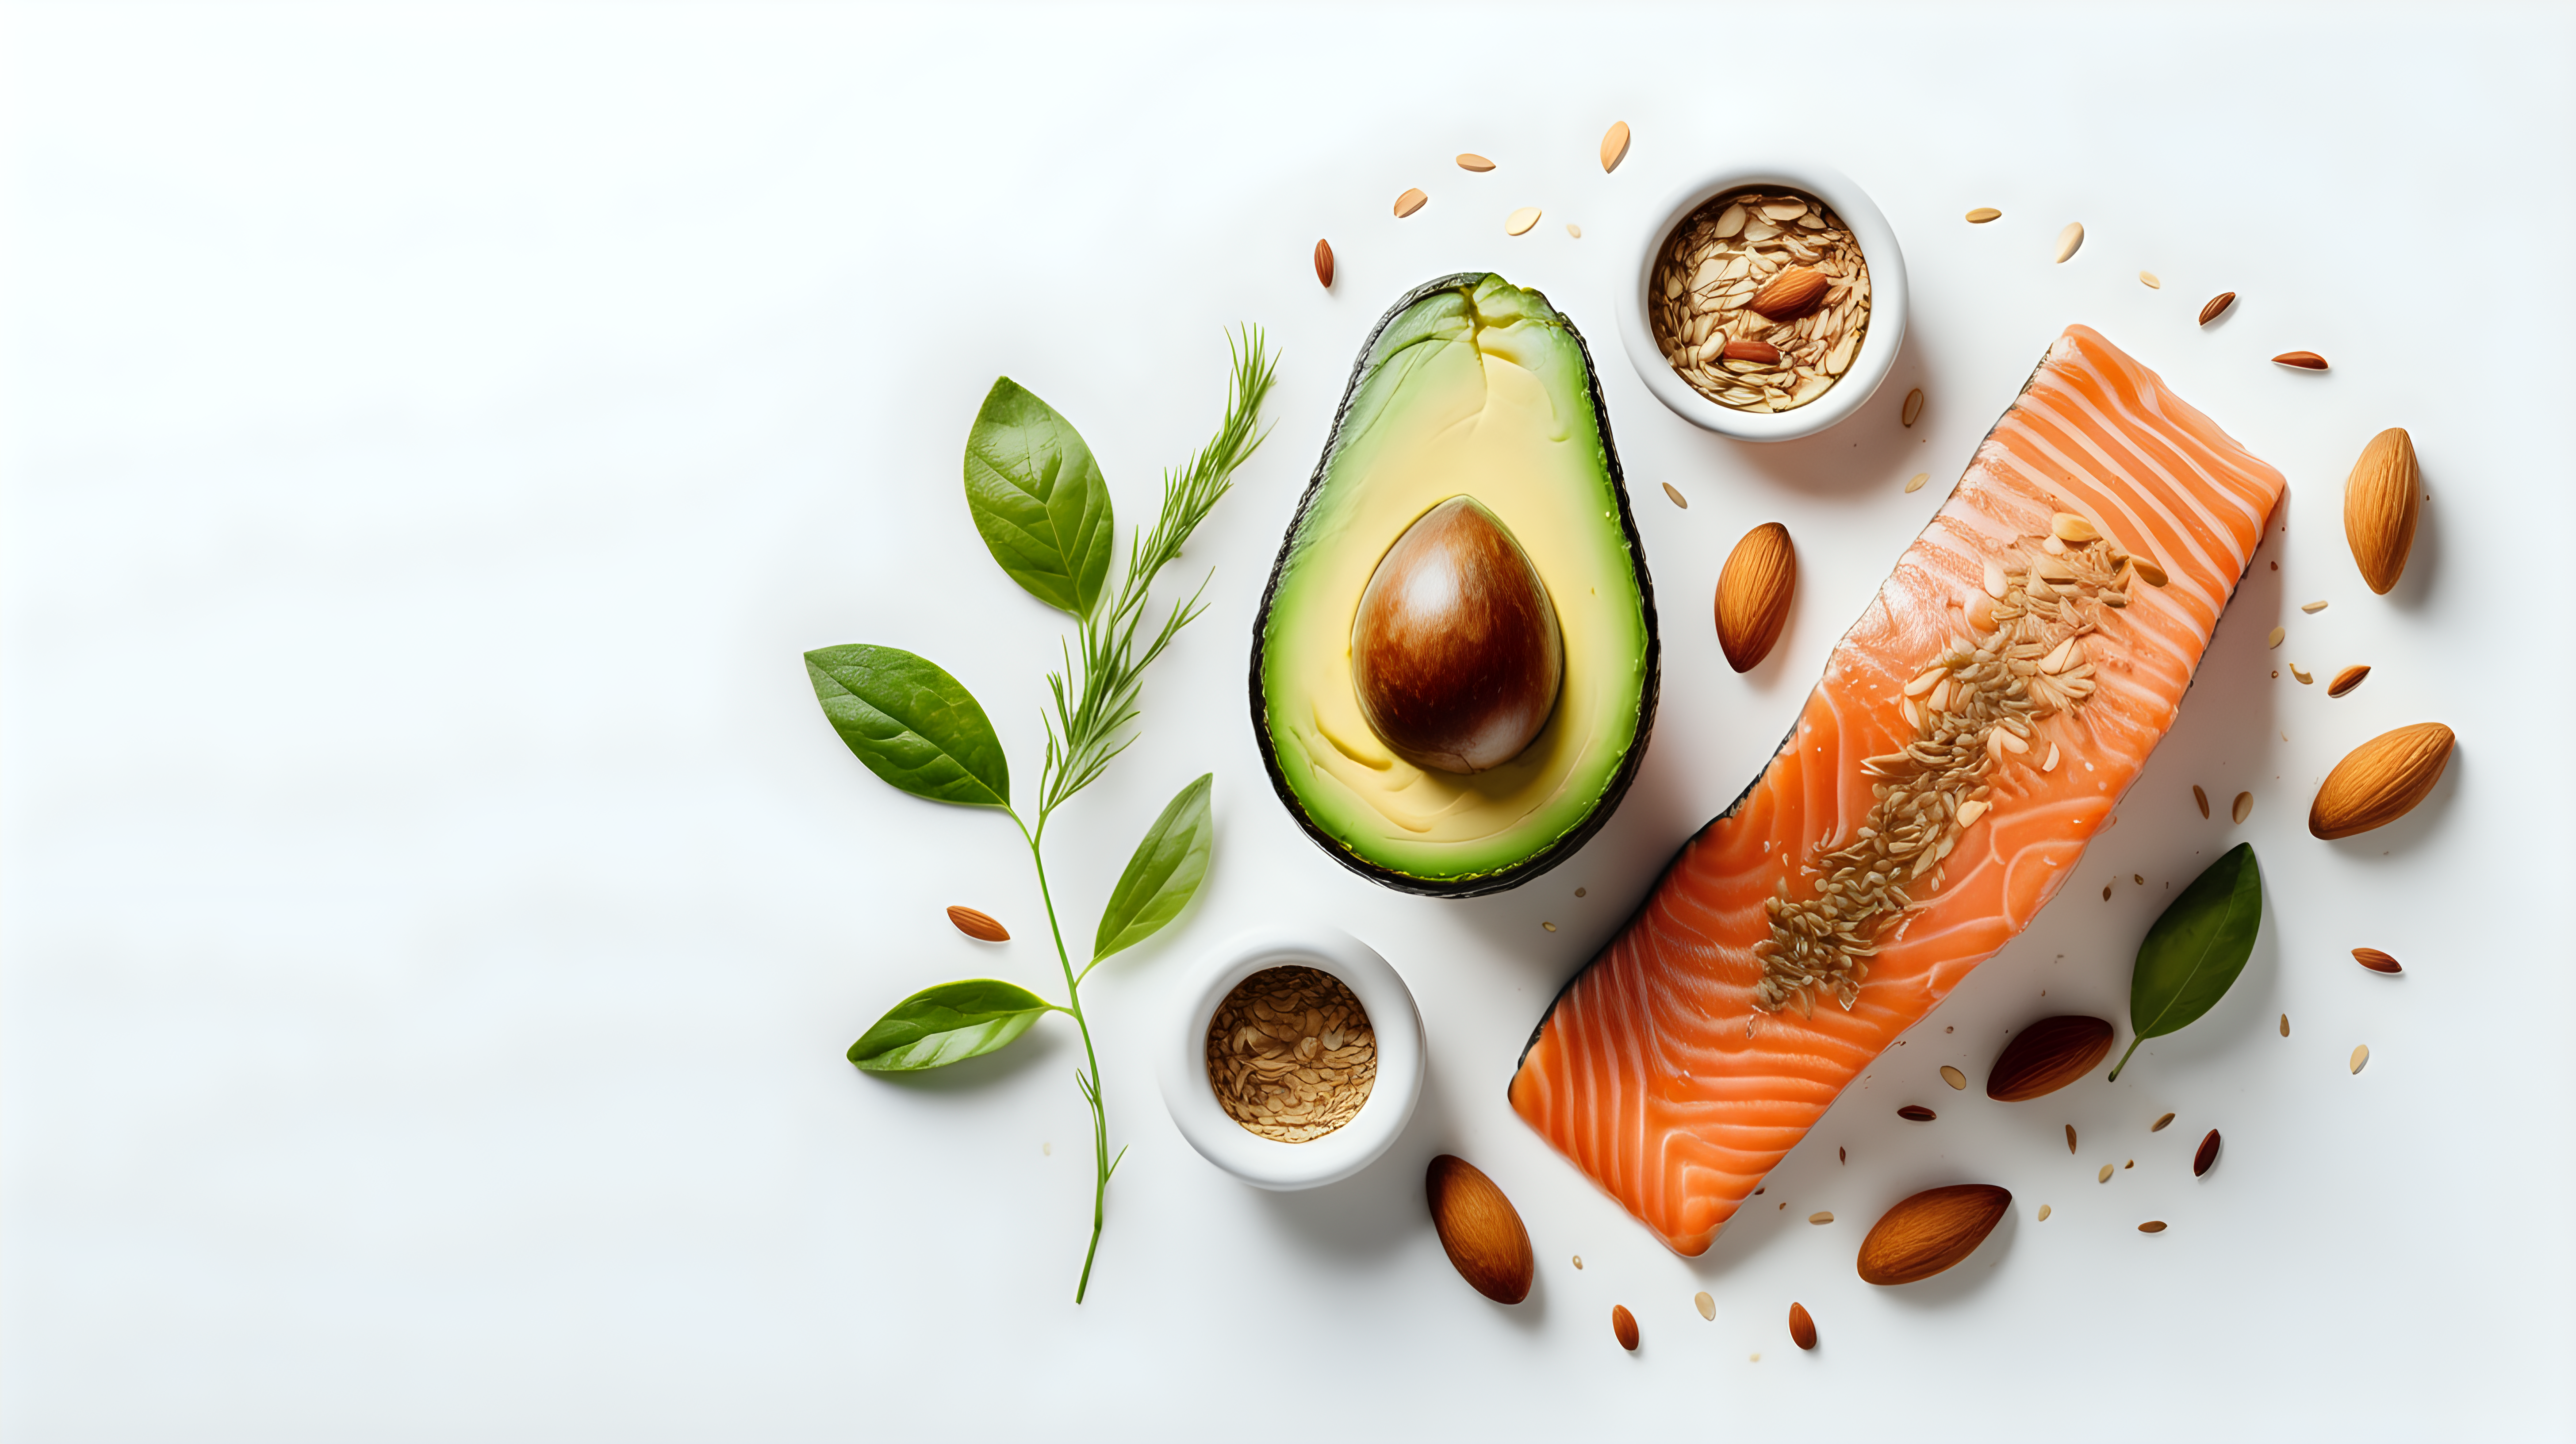 avocado and almond,flax seed oil salmon on white background, copy space